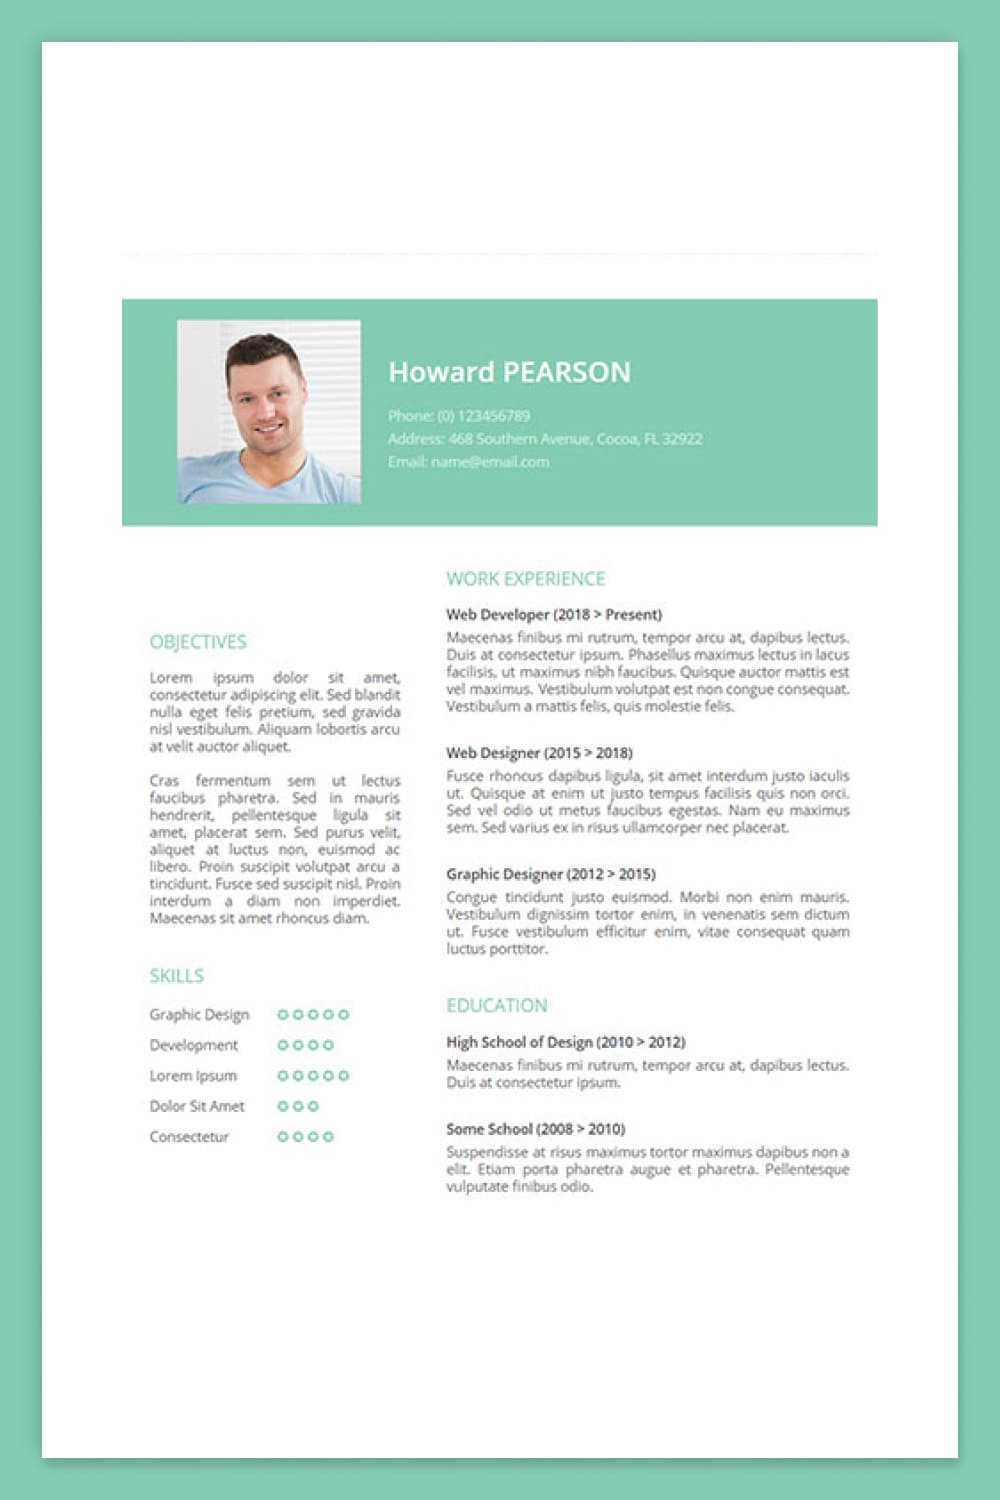 Resume with photo, two columns and green color scheme.